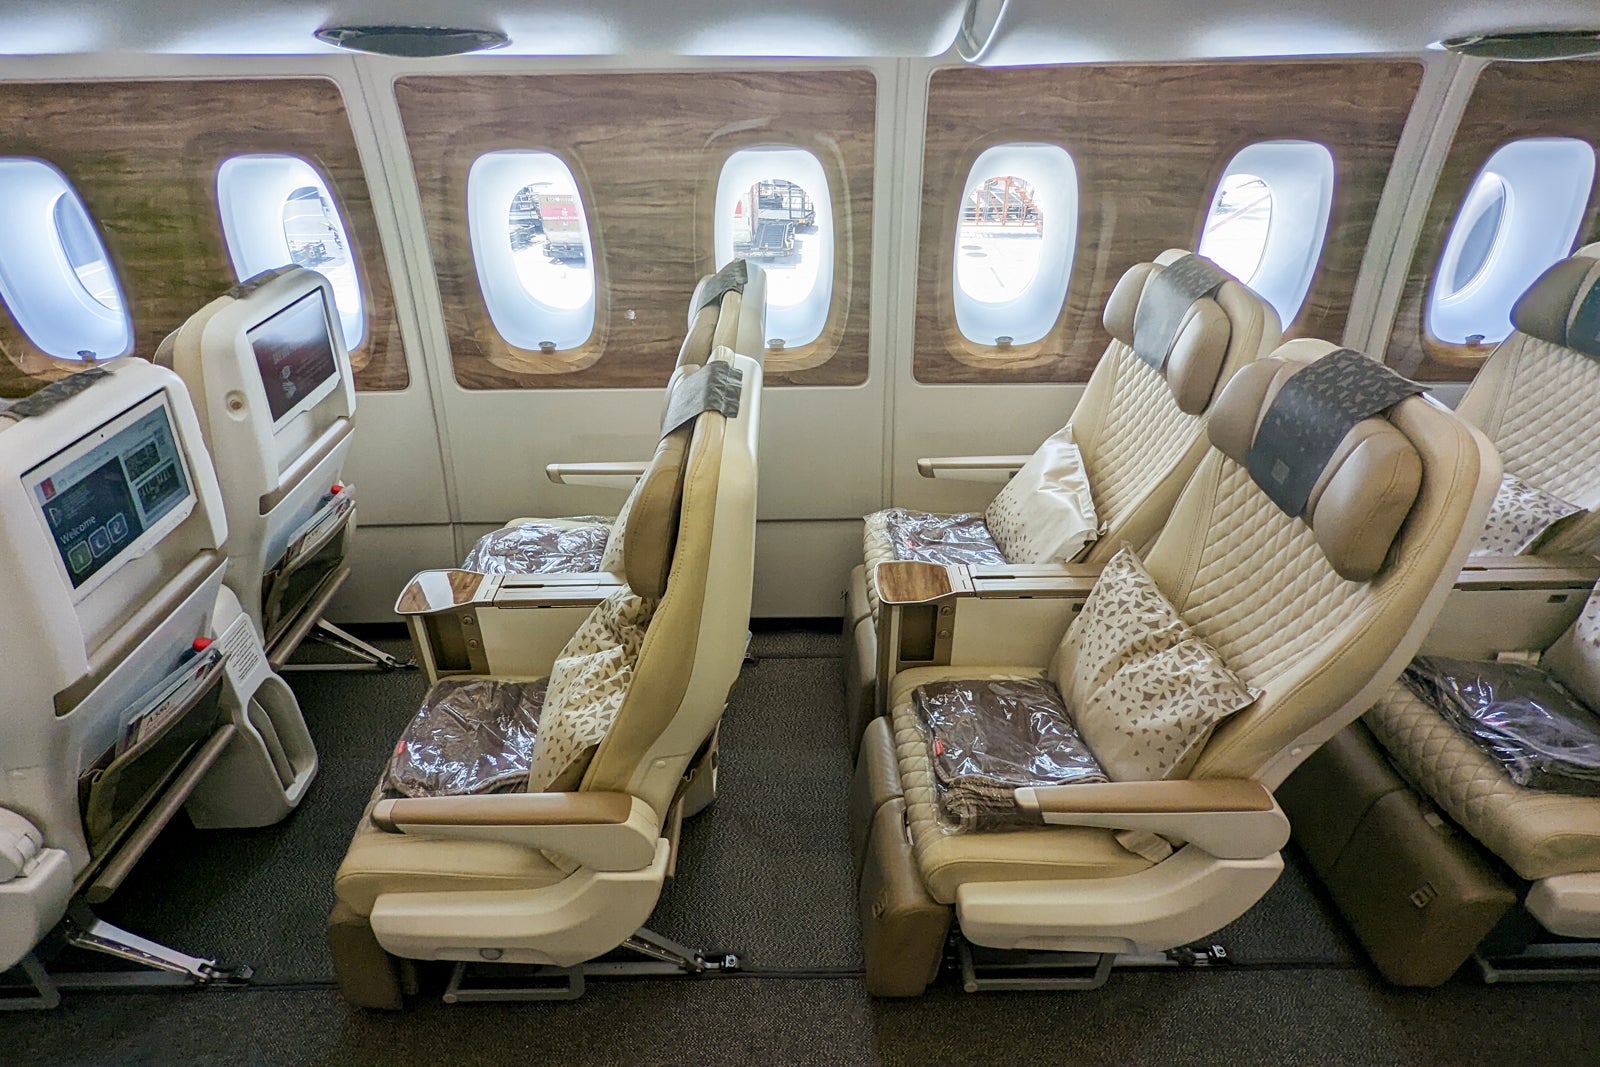 6 Best Airplane Seat Cushions in 2019 [Reviews & Buyer's Guide]